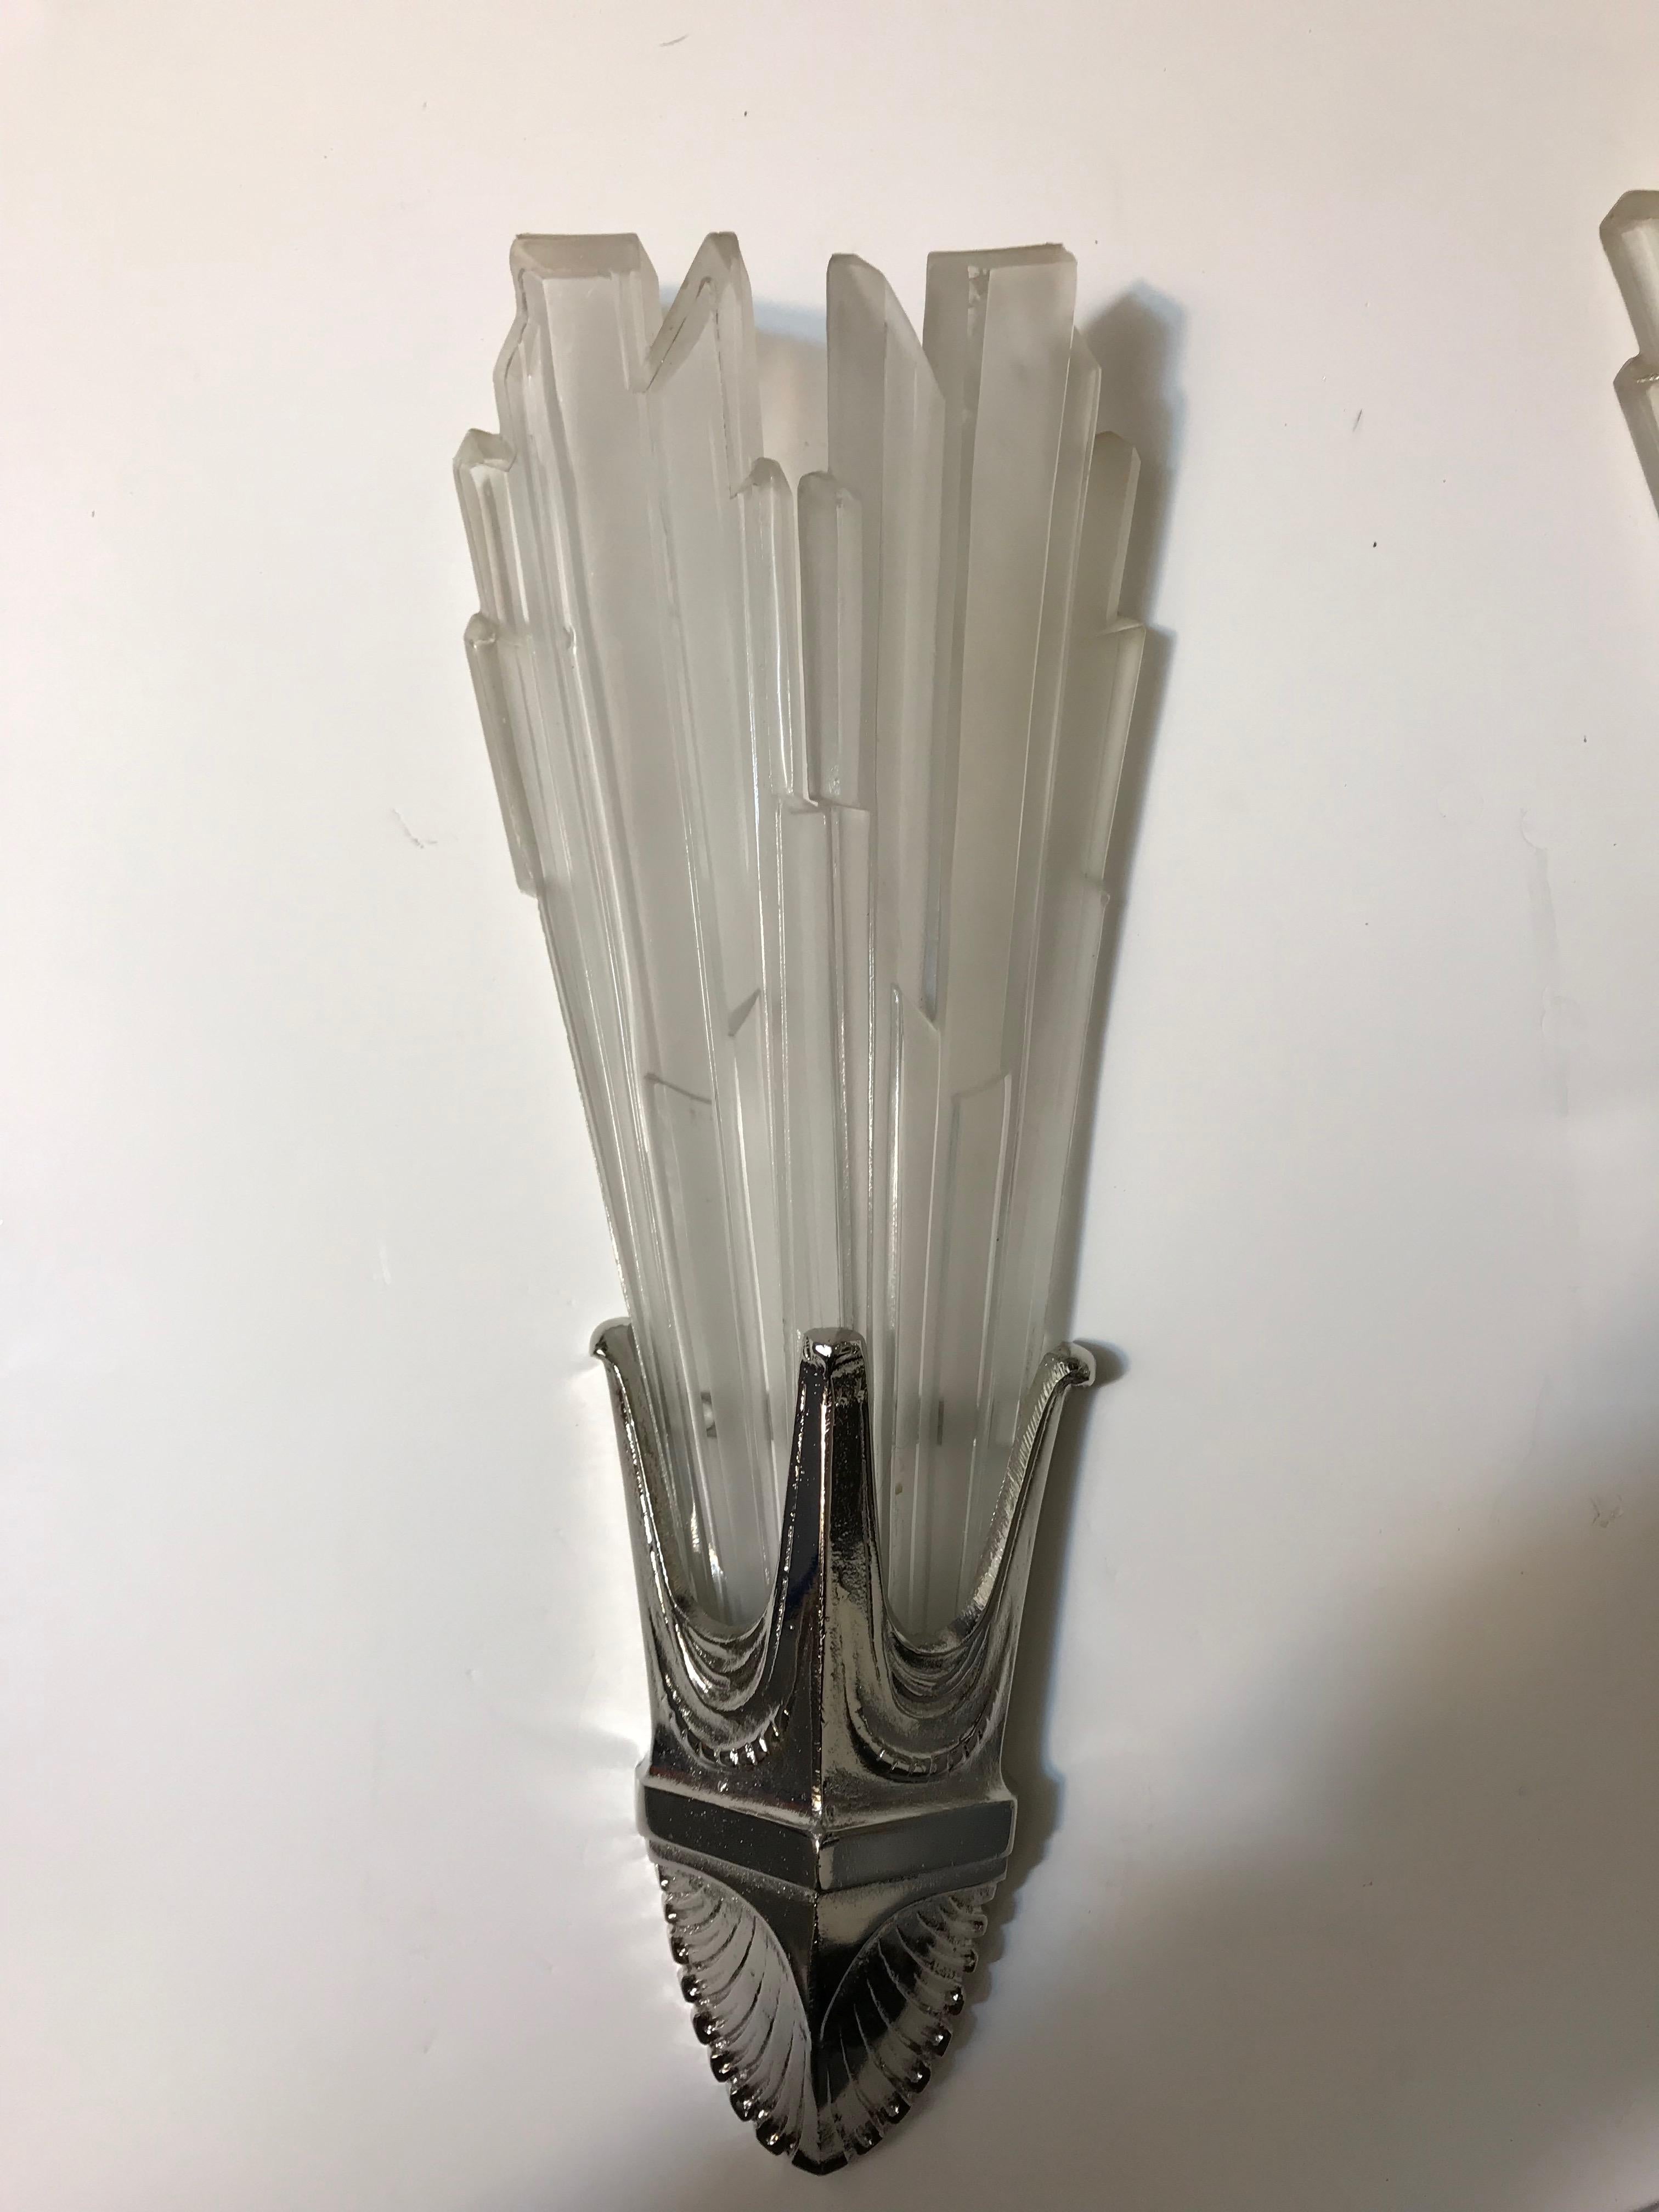 Pair of French Art Deco sconces by G Leleu. Having clear frosted glass shades with geometric motif details throughout. Held by polished nickel geometric design frames. Has been rewired for American use. Each sconce takes one 60 watt candelabra